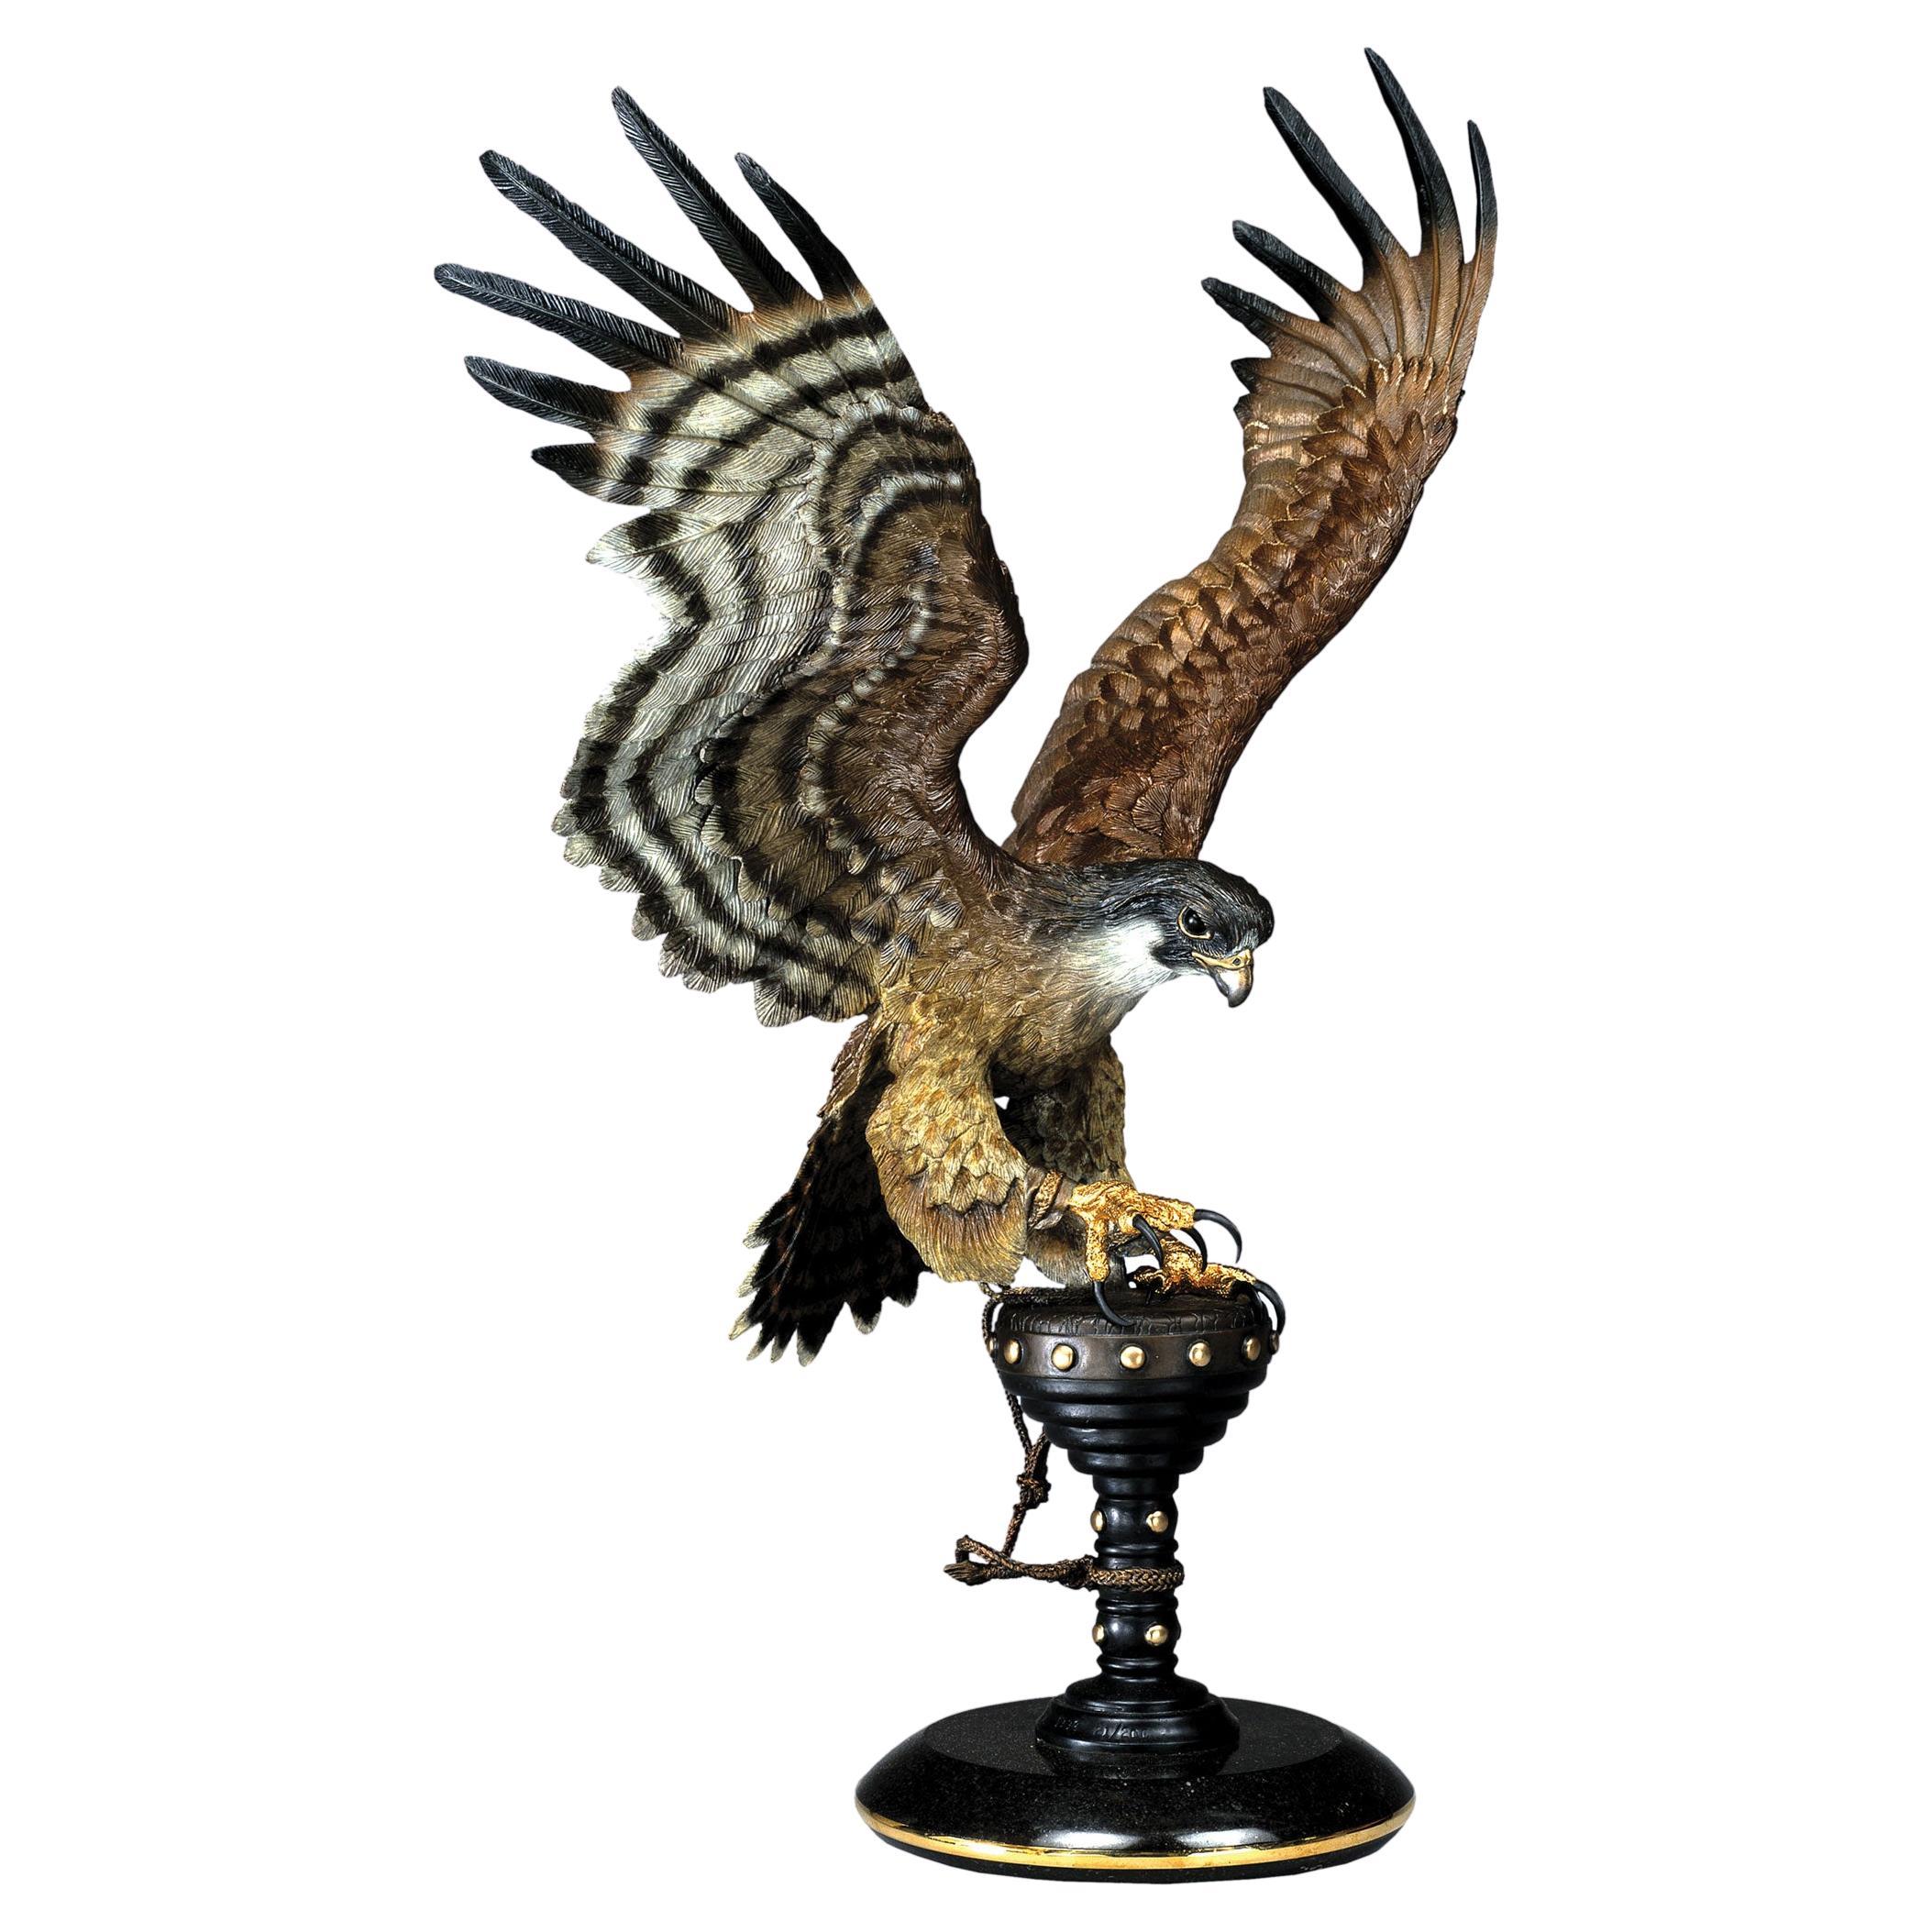 Chester Fields 'Falcon Crest', Full Round Sculpture Signed Art W/ 24kt. Details For Sale